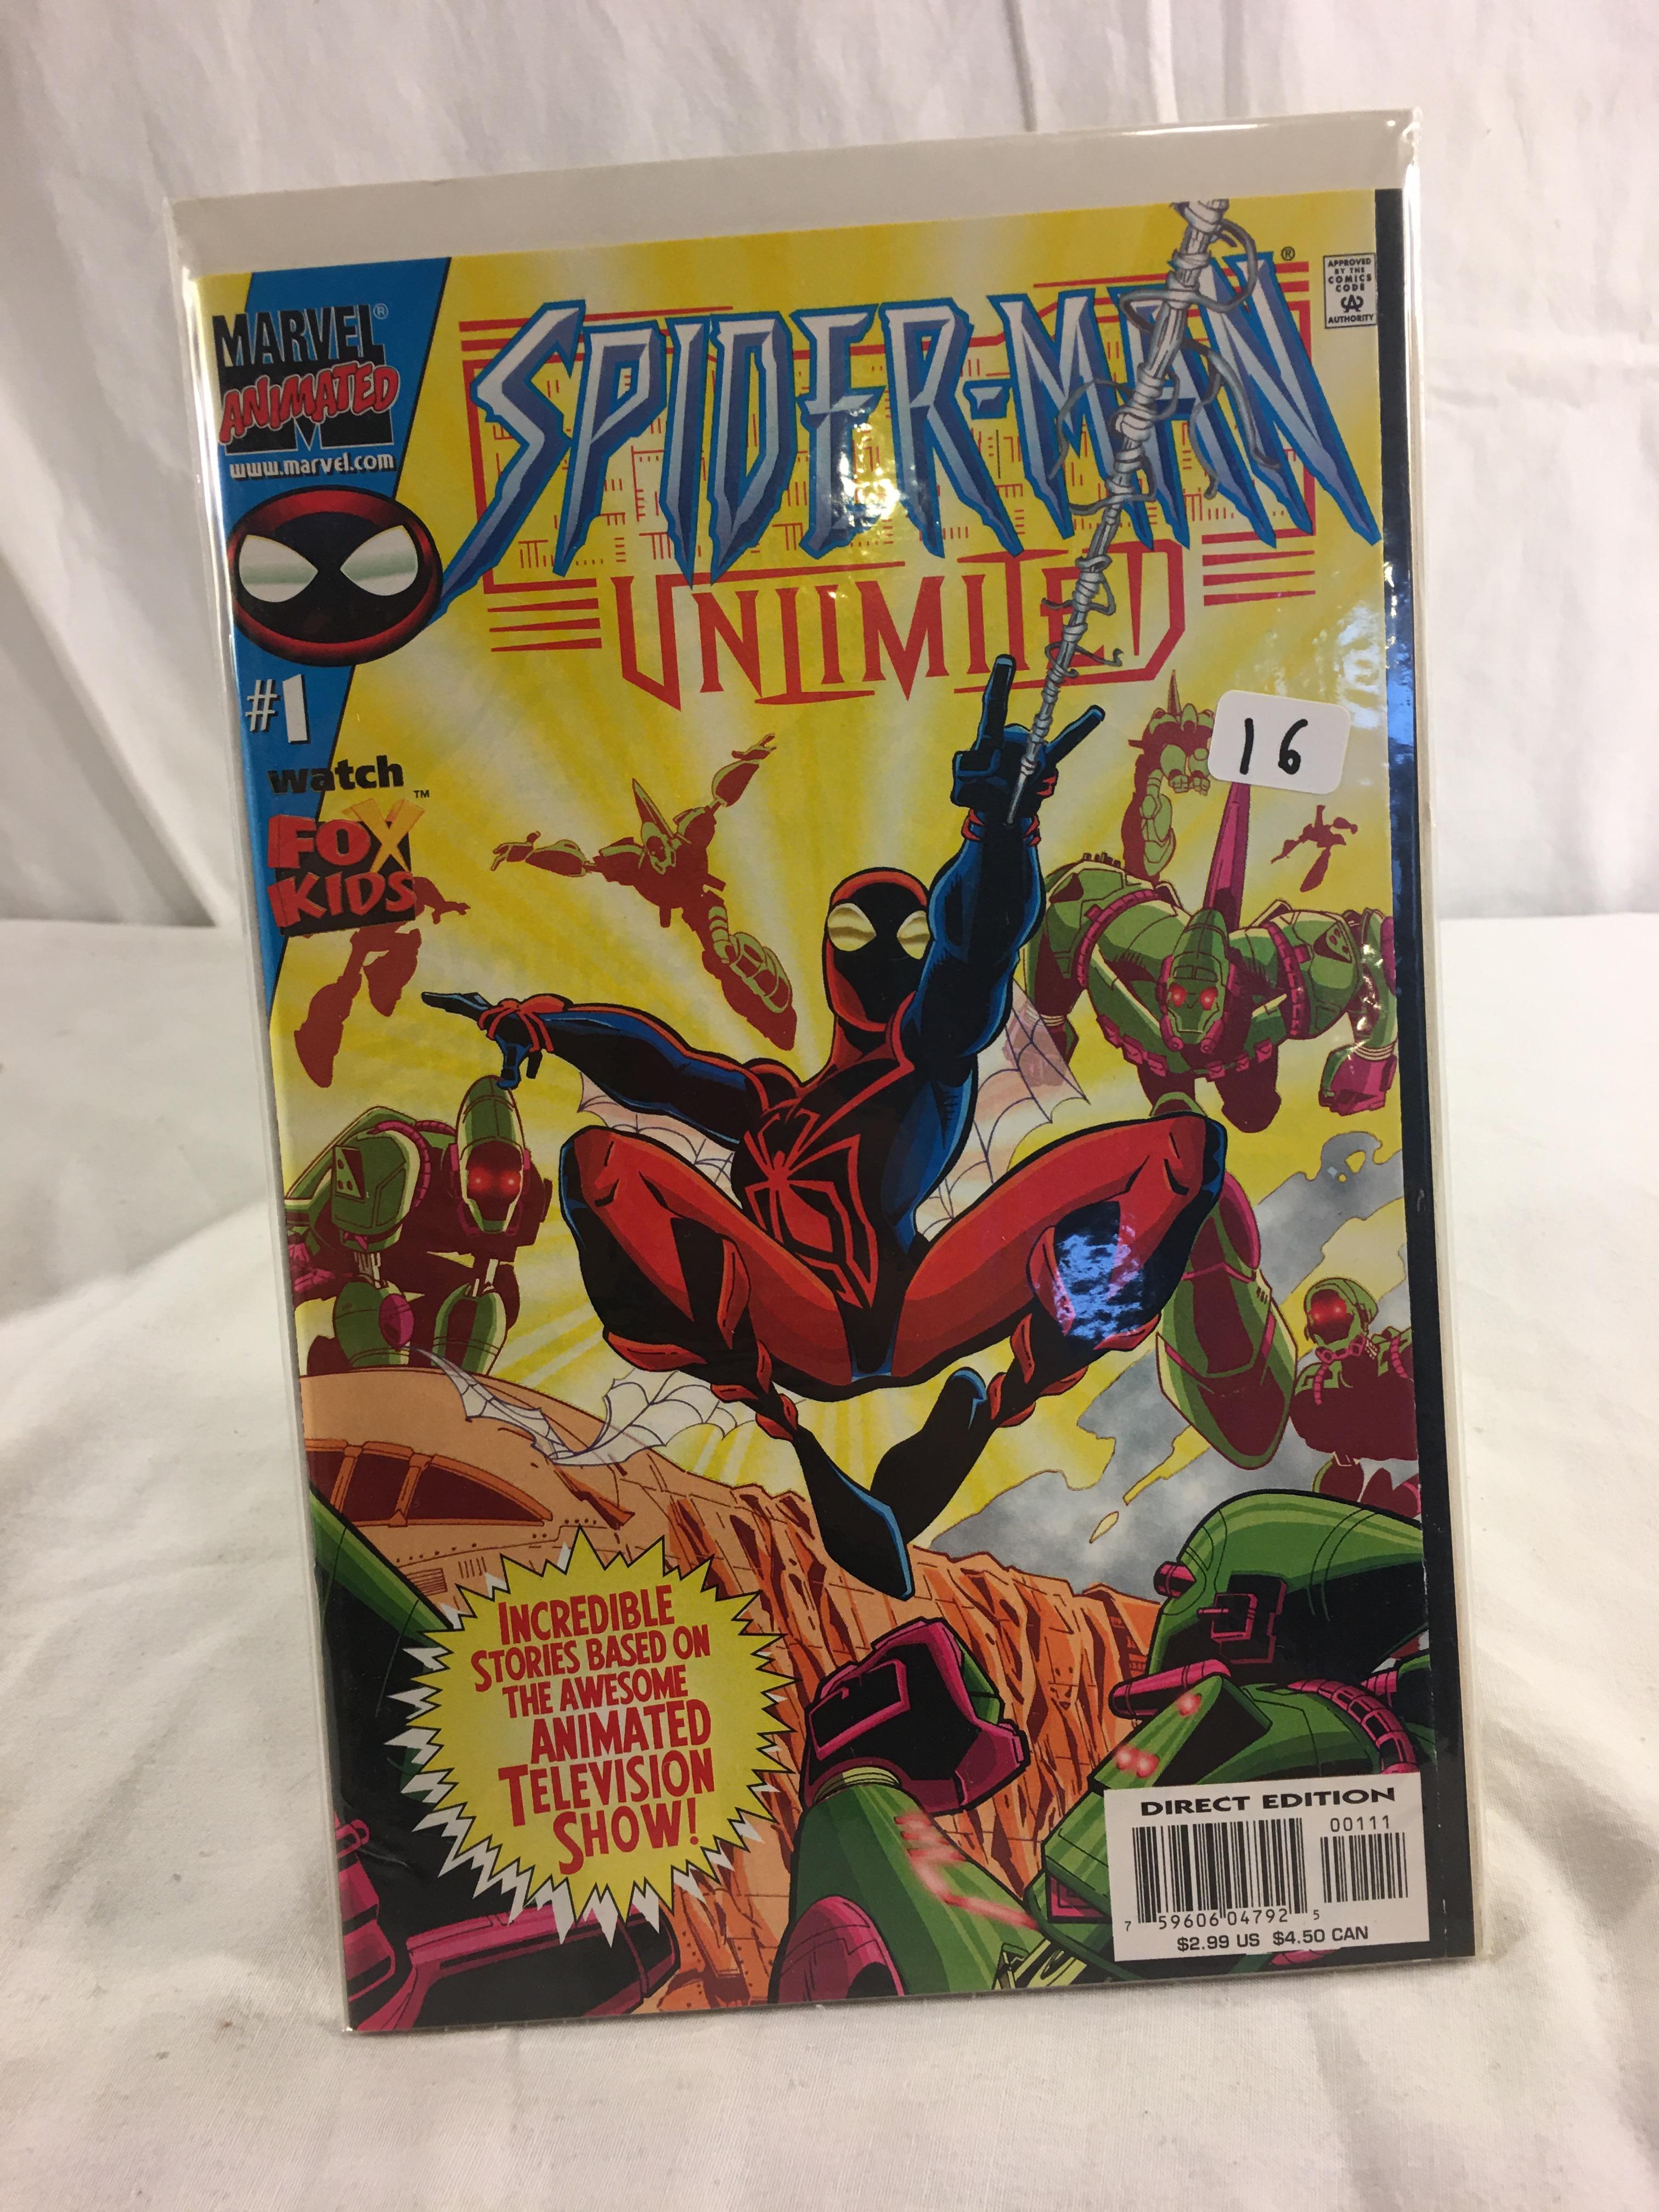 Collector Marvel Animated Comics Spider-Man Unlimited No.1